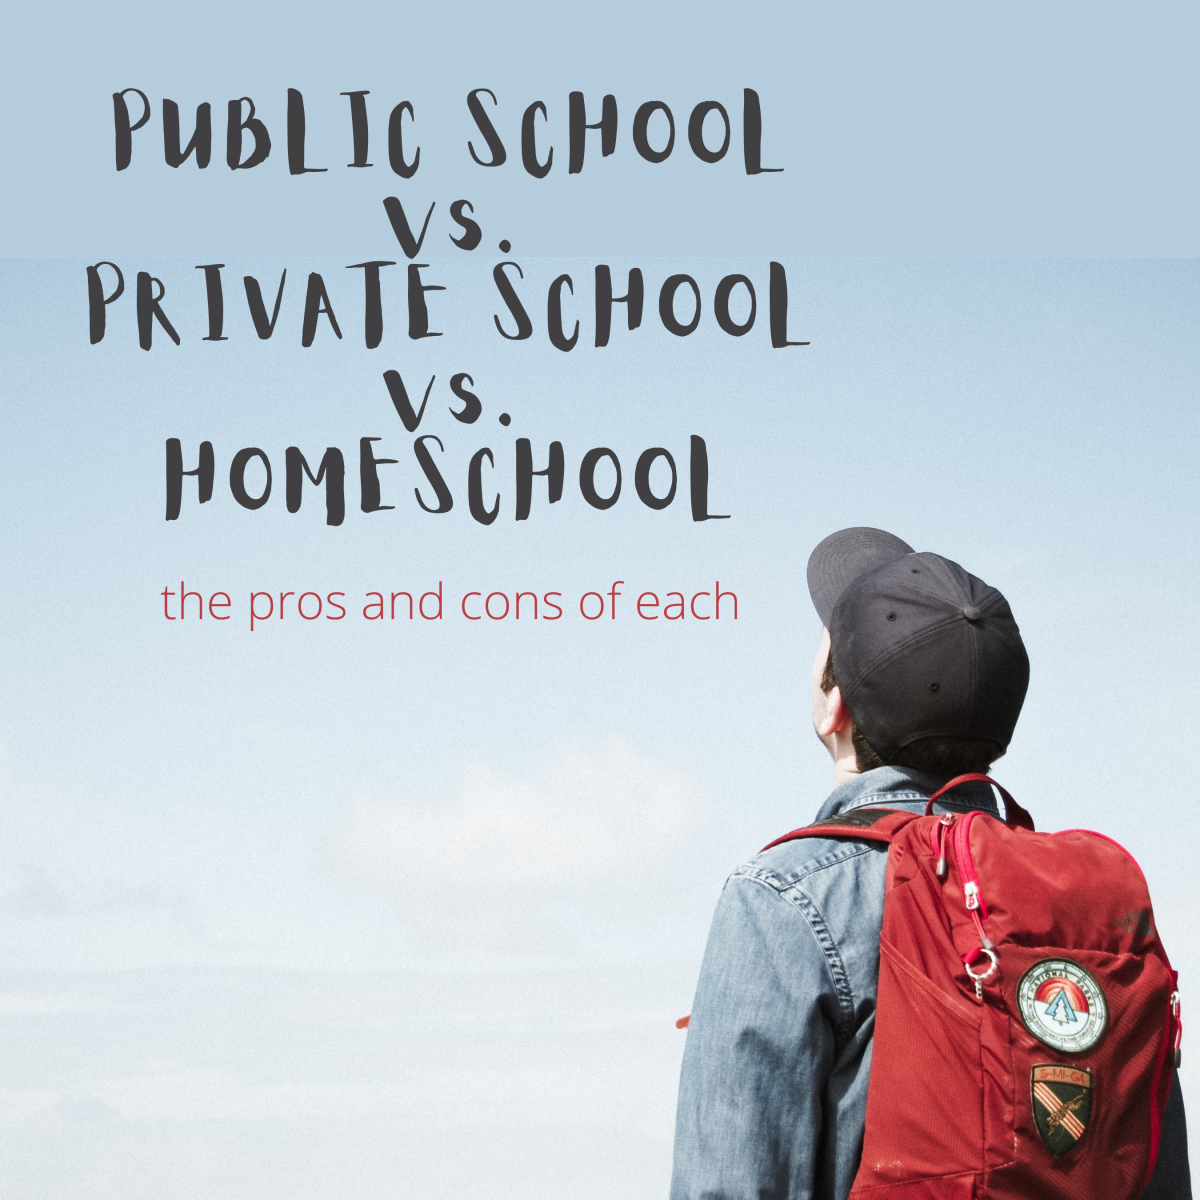 homeschooling debate pros and cons